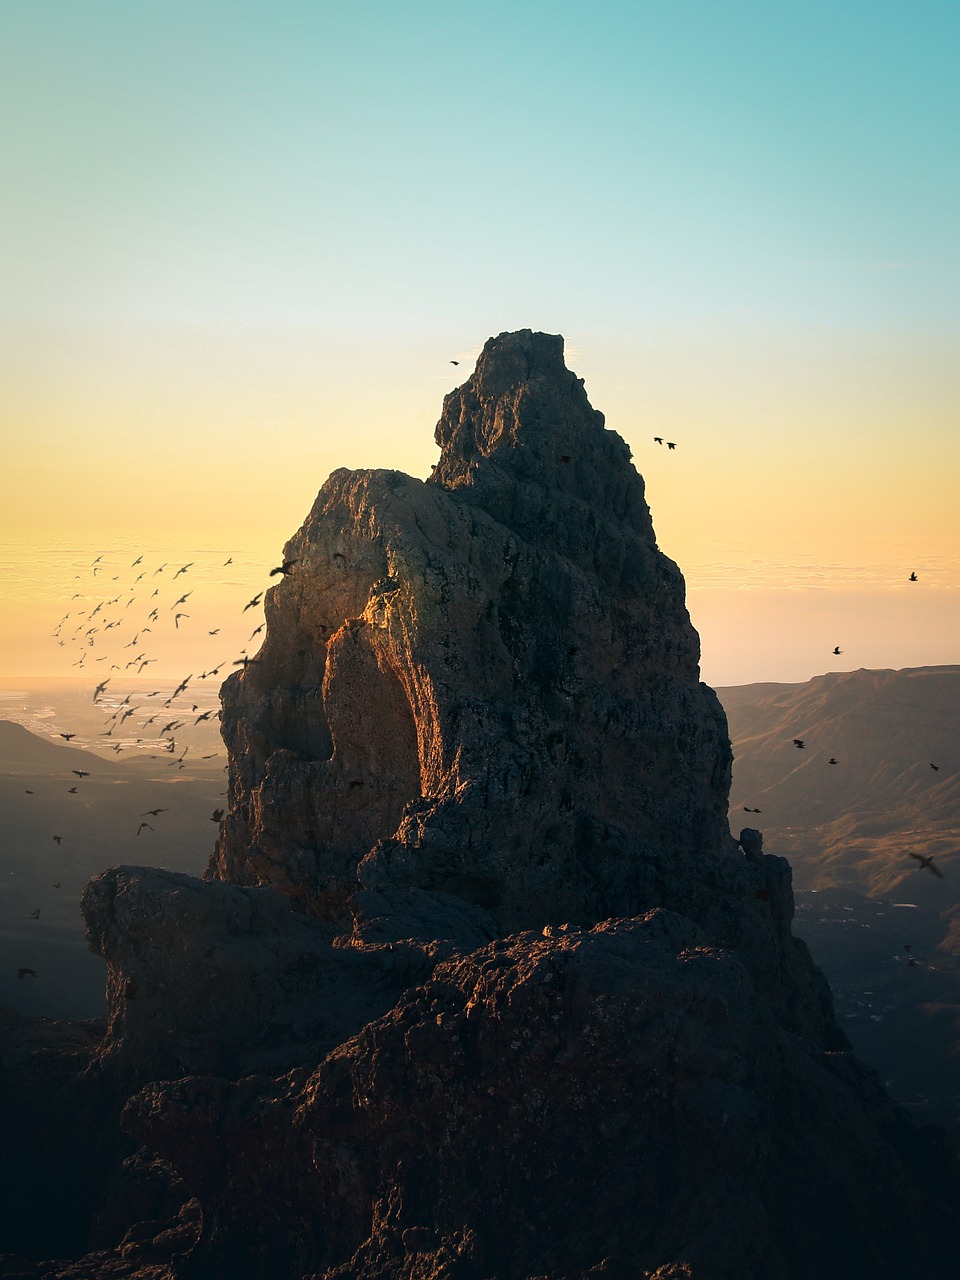 a large group of birds flying over a mountain, by Andrei Kolkoutine, romanticism, monolith, photography alexey gurylev, spire, warm sundown